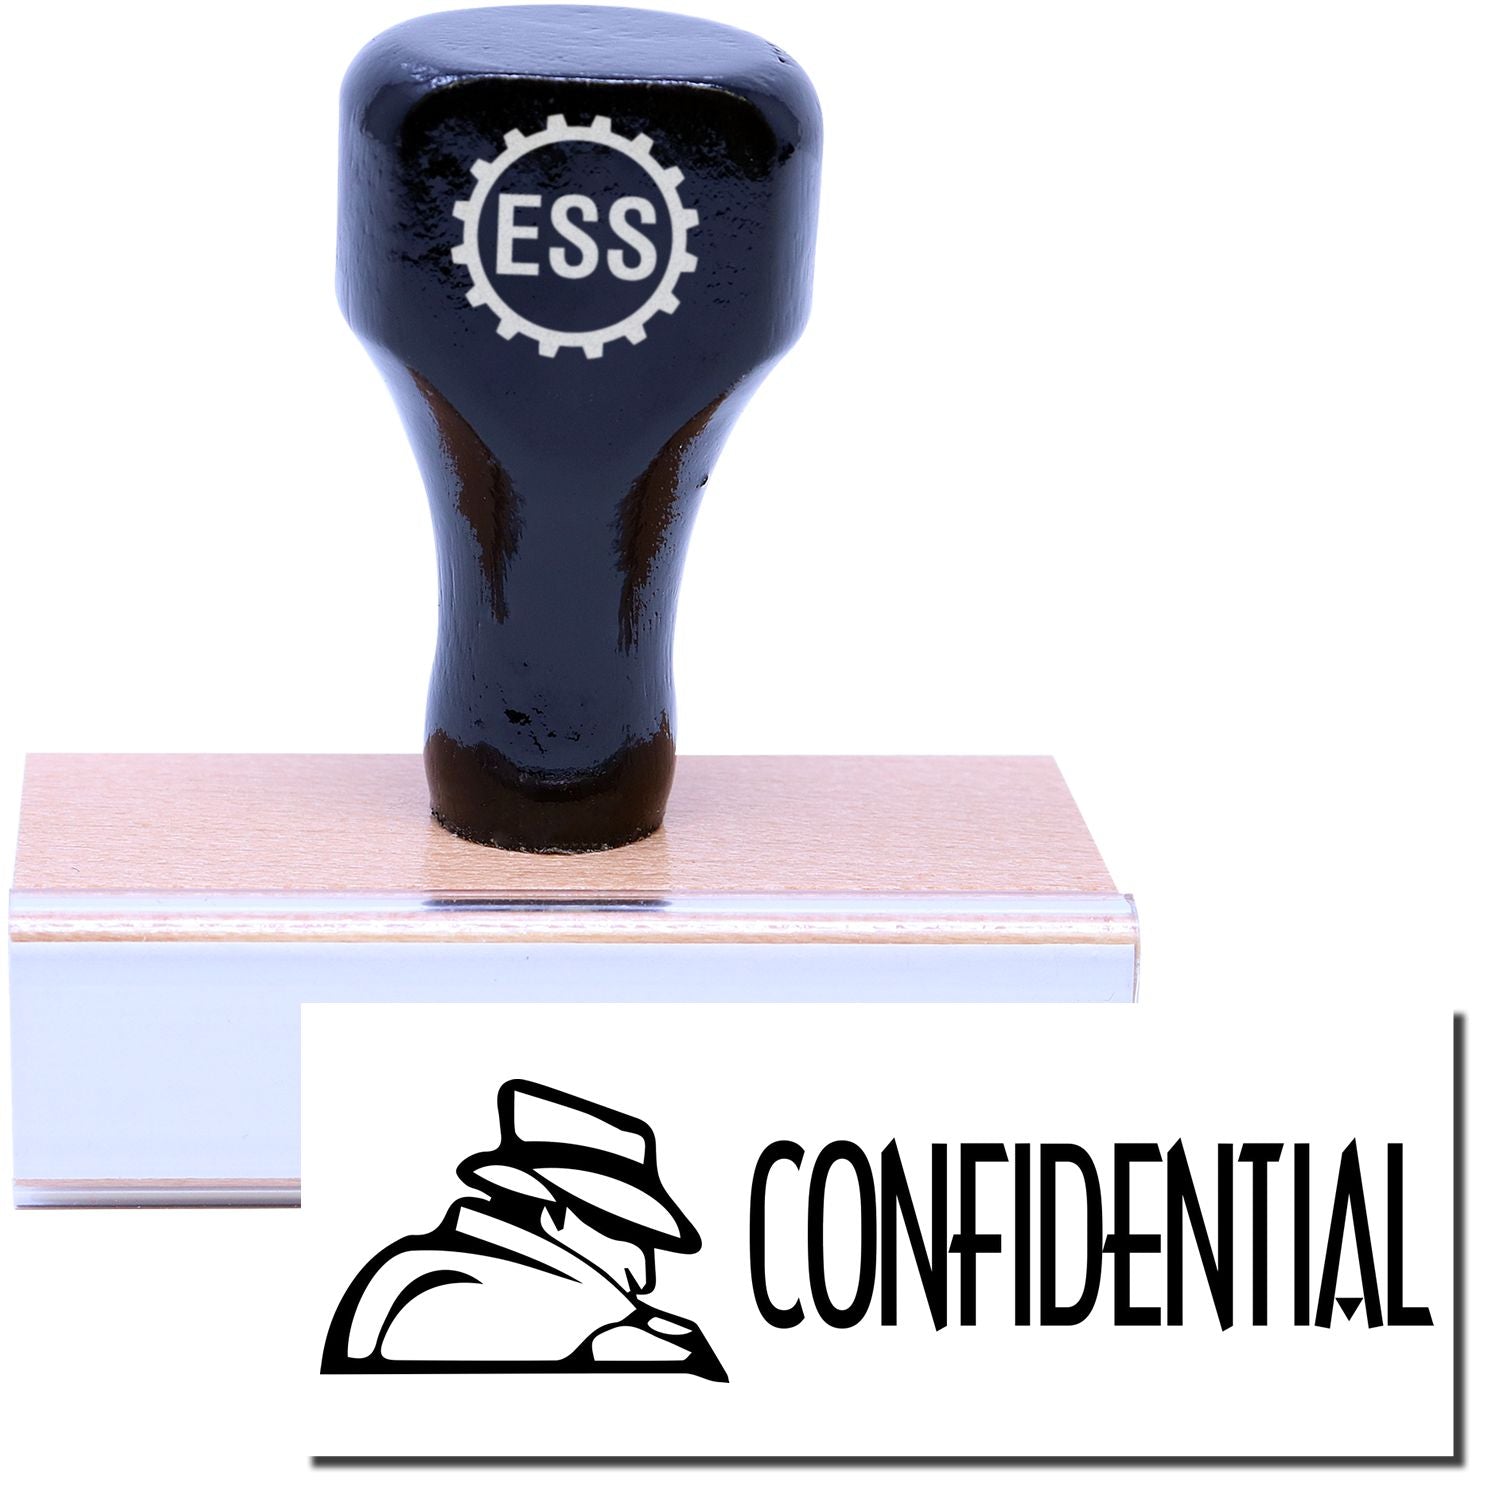 A stock office rubber stamp with a stamped image showing how the text "CONFIDENTIAL" with an eye-catching logo on the left side is displayed after stamping.